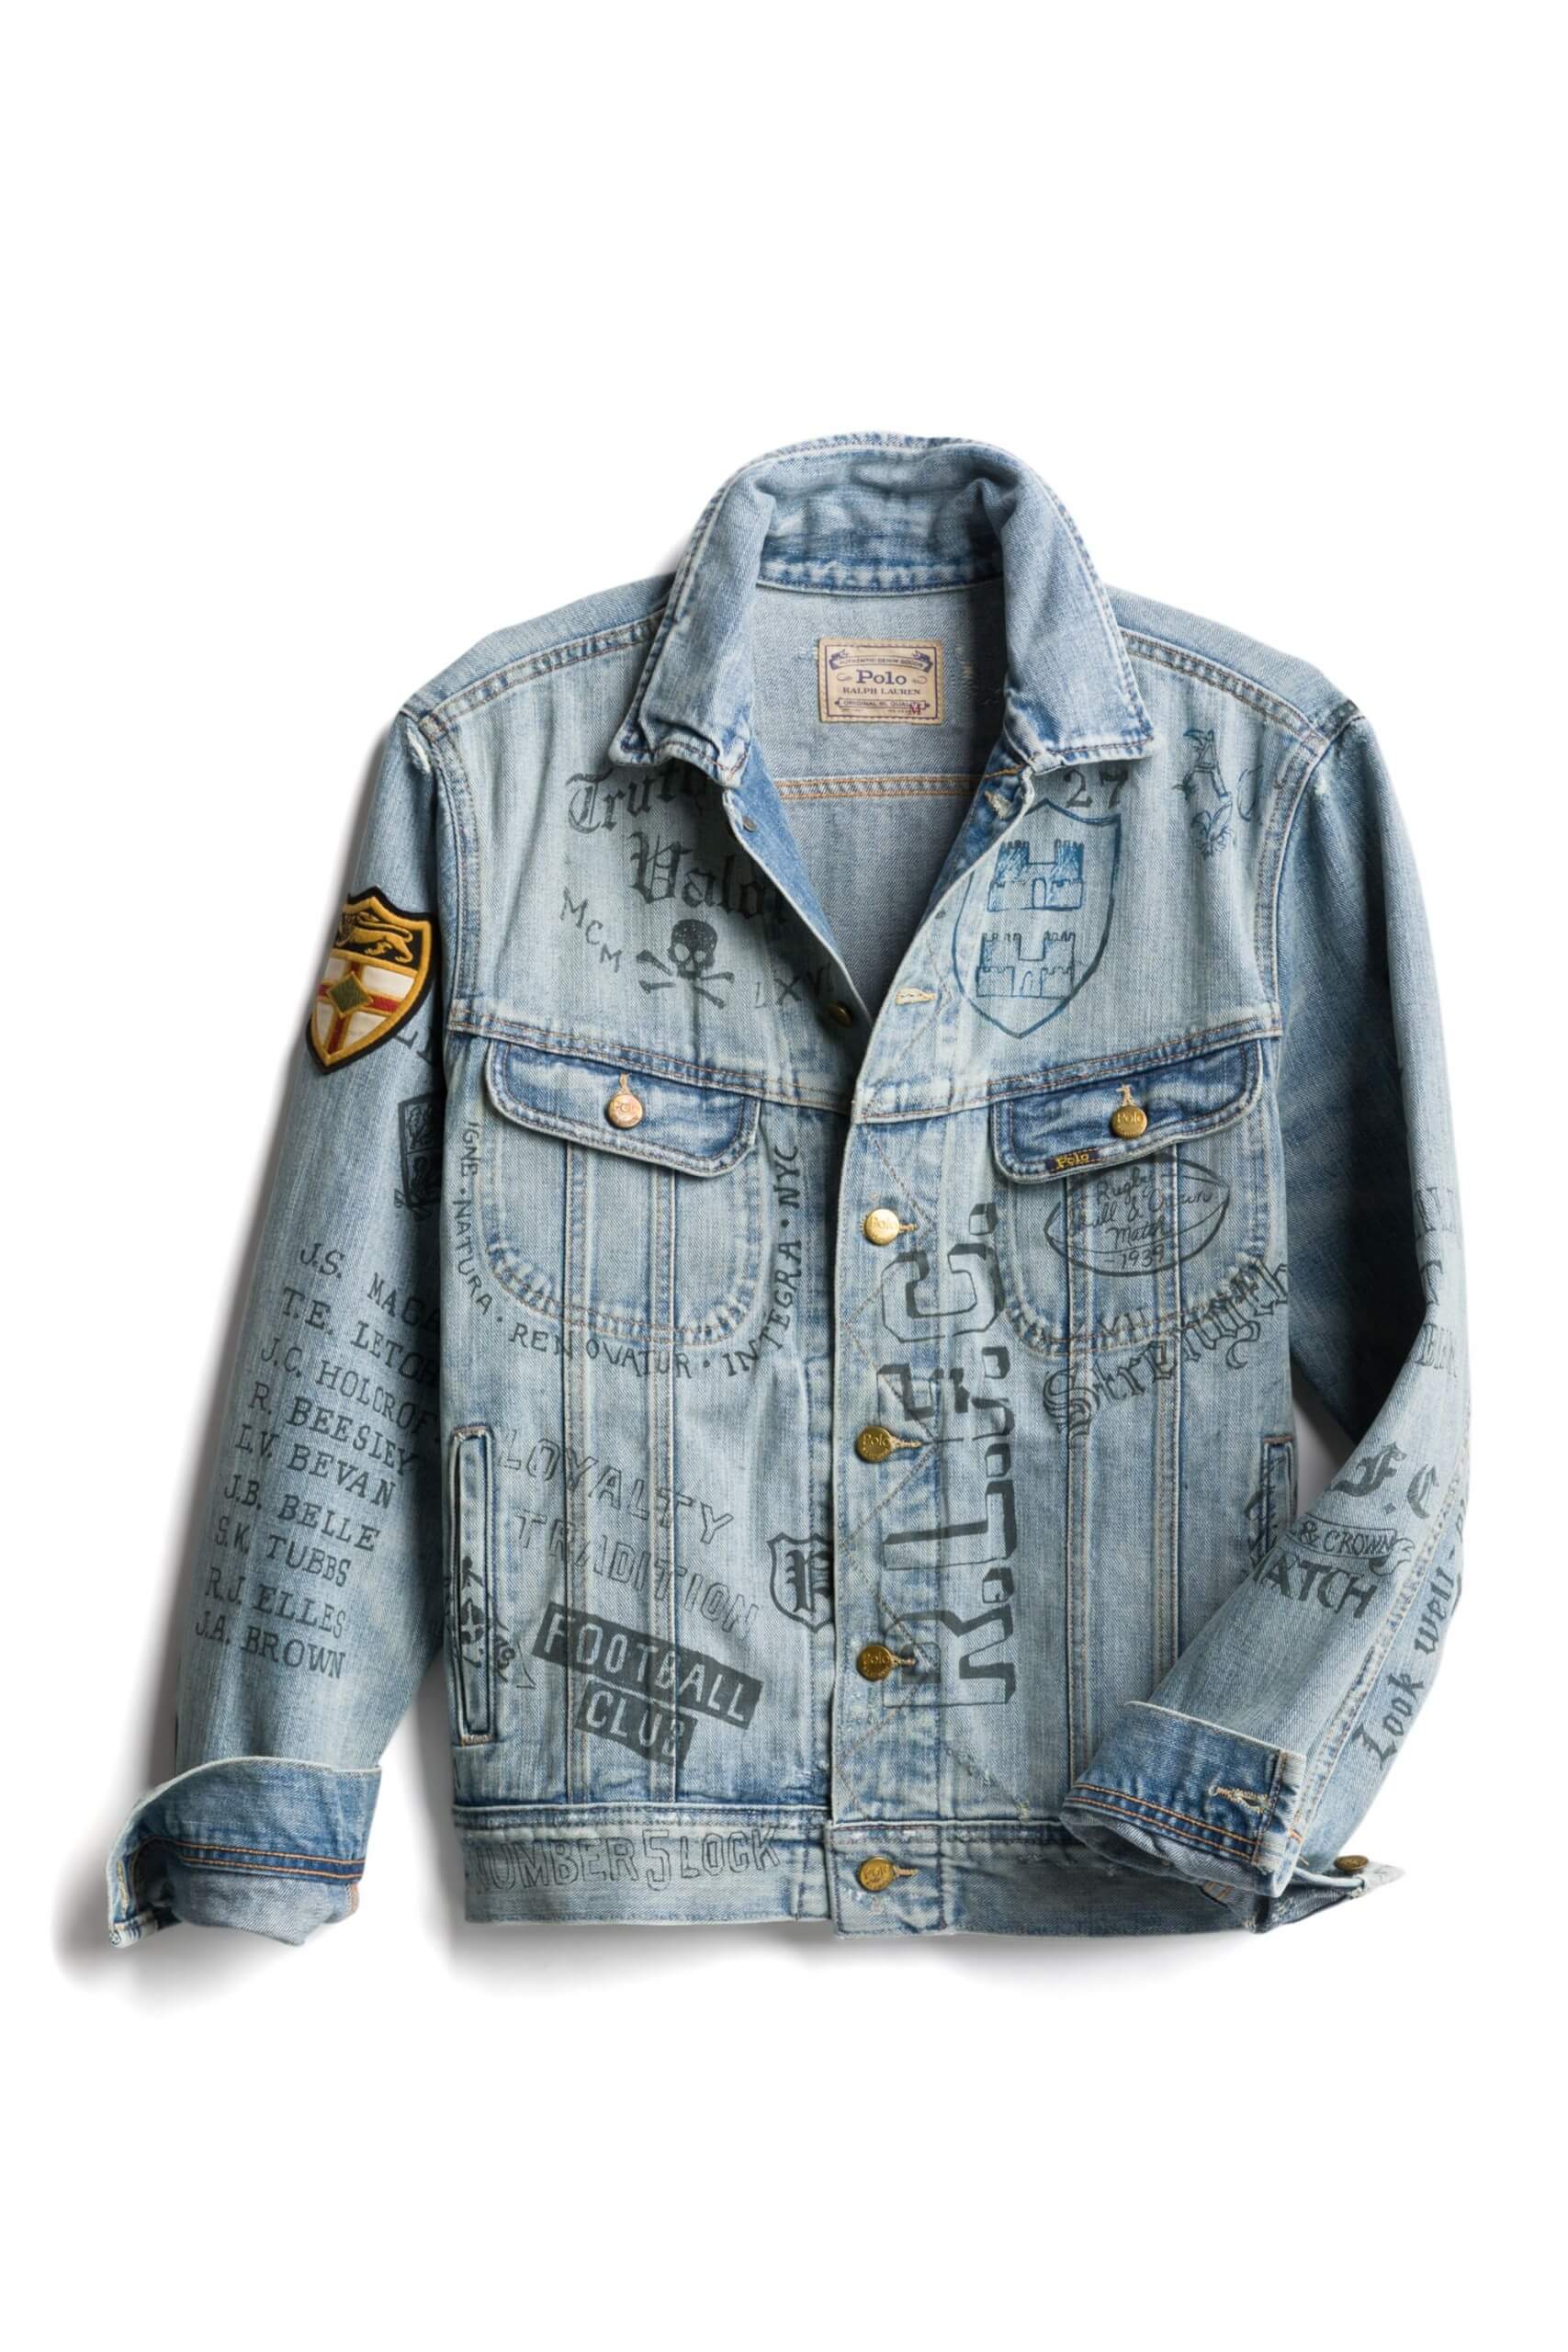 4 Ways to Style a Denim Jacket with Pants